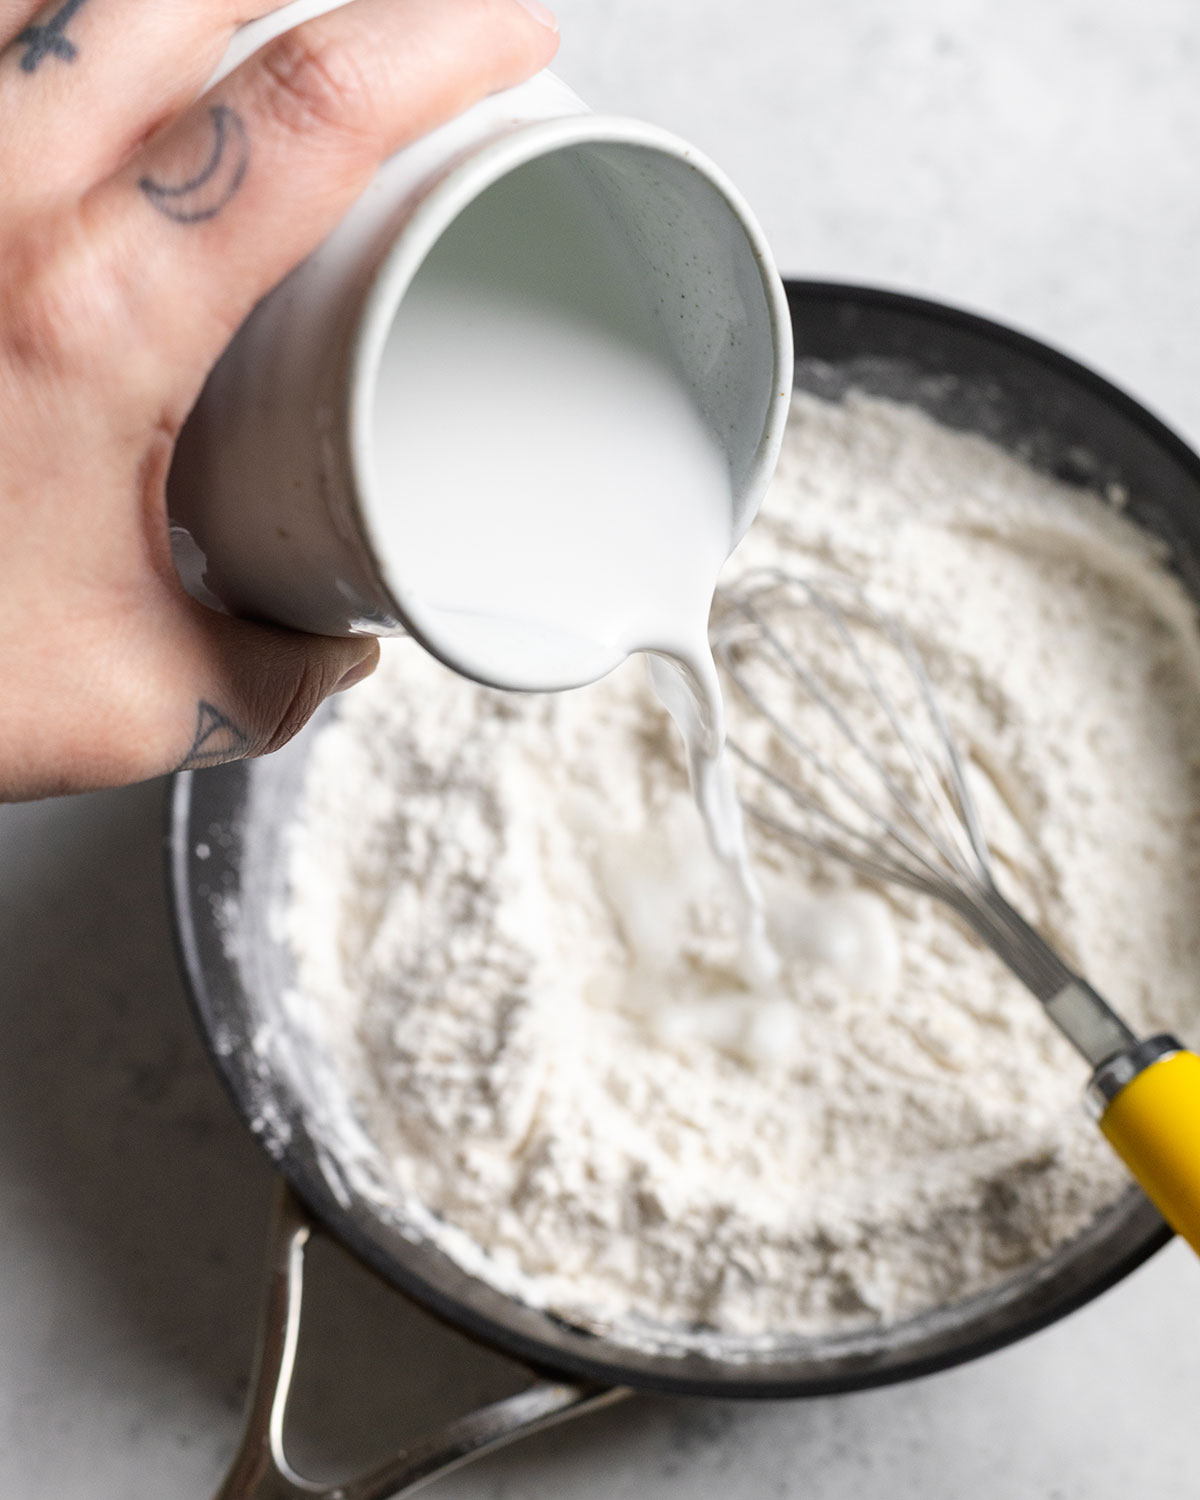 A hand pouring coconut milk from a jug into the dry ingredients in a pan.